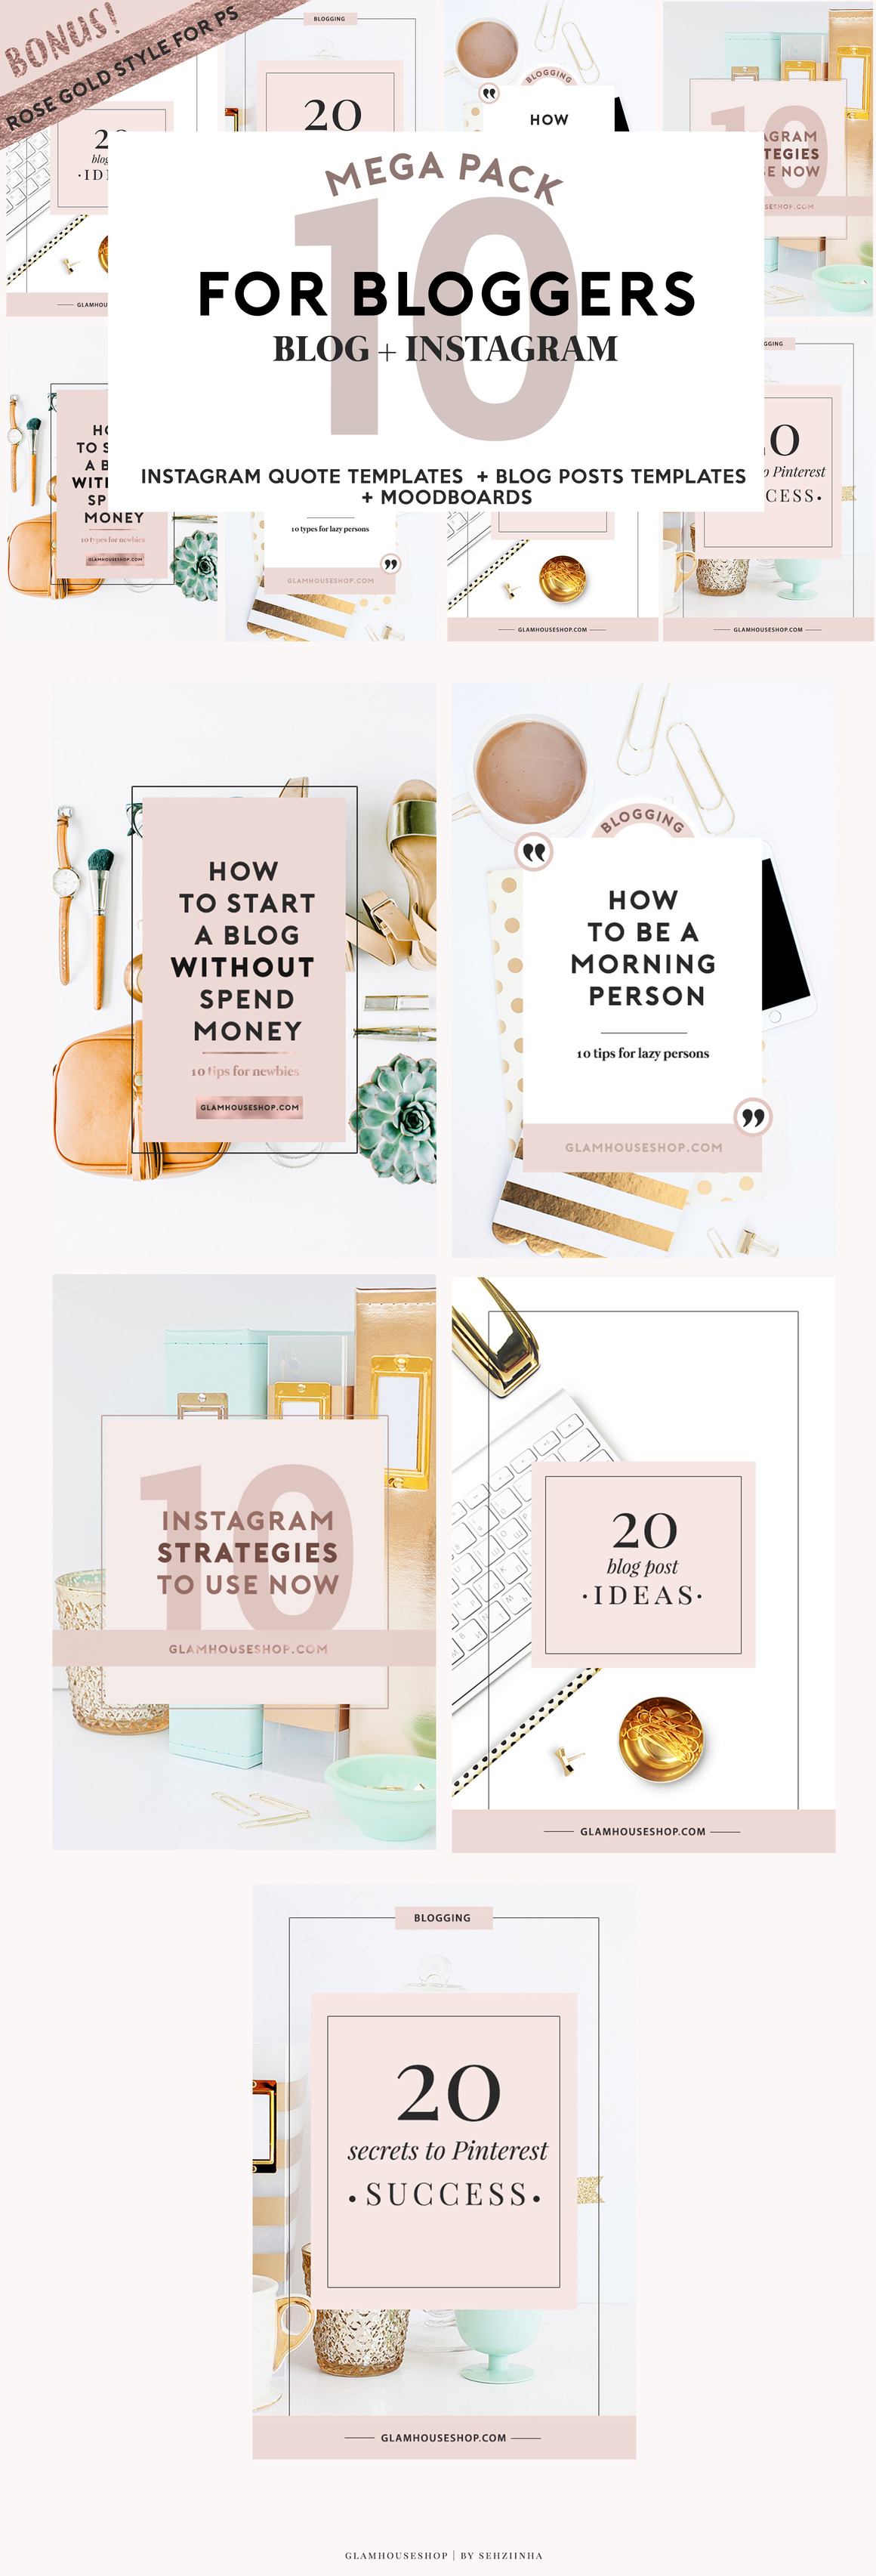 Mega pack for bloggers of blog and Instagram templates